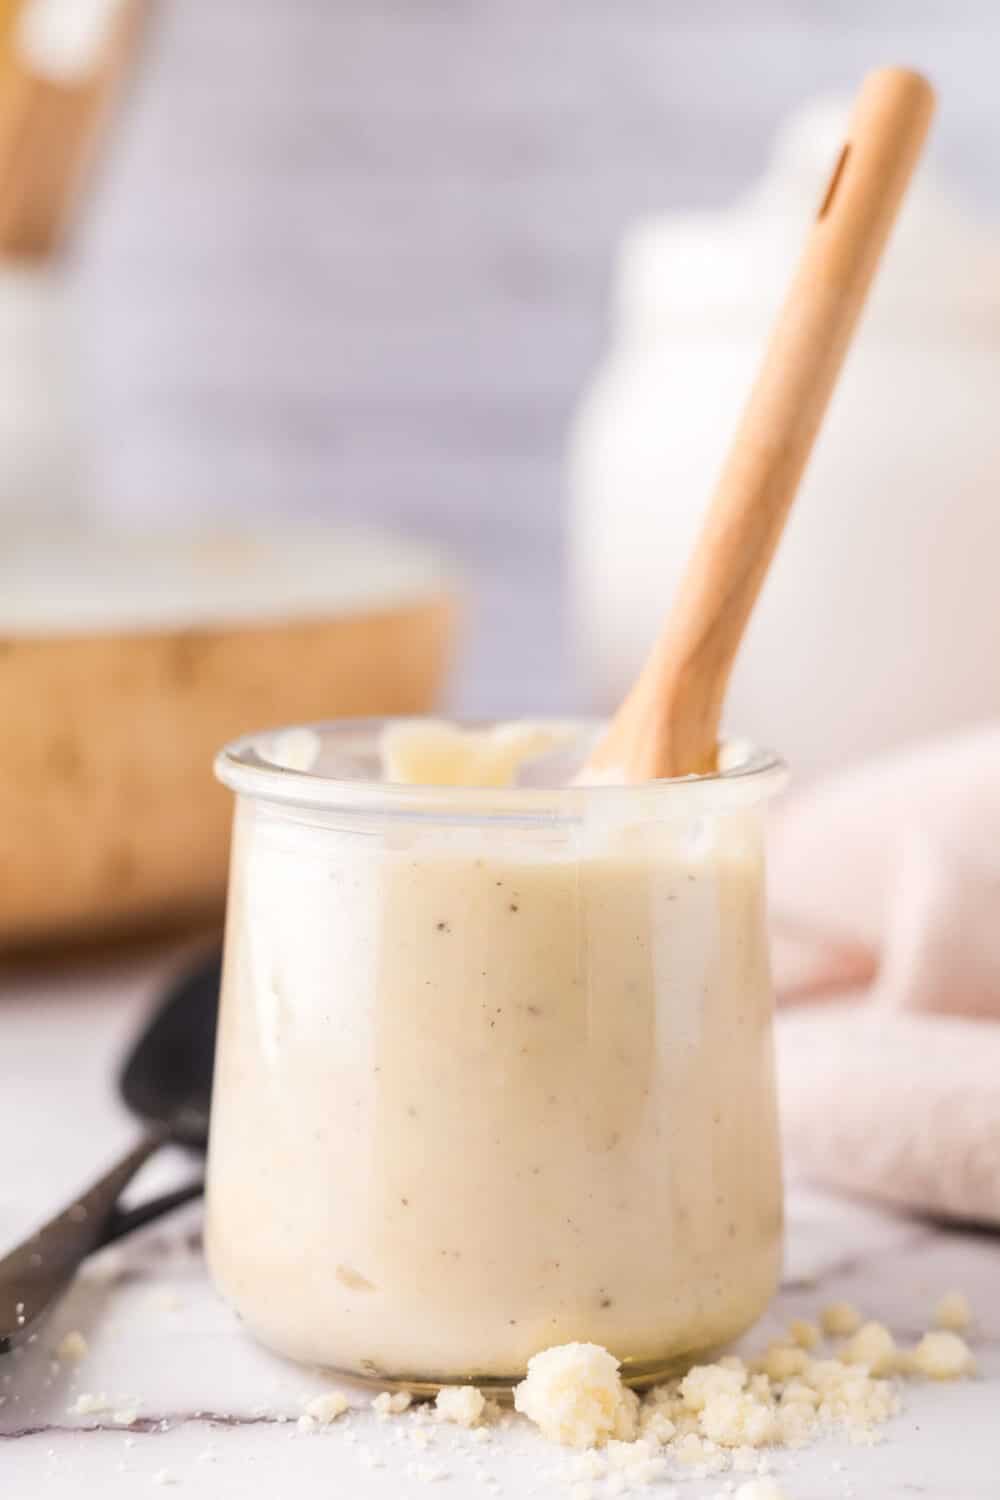 wooden spoon inside a small glass jar of white pizza sauce.